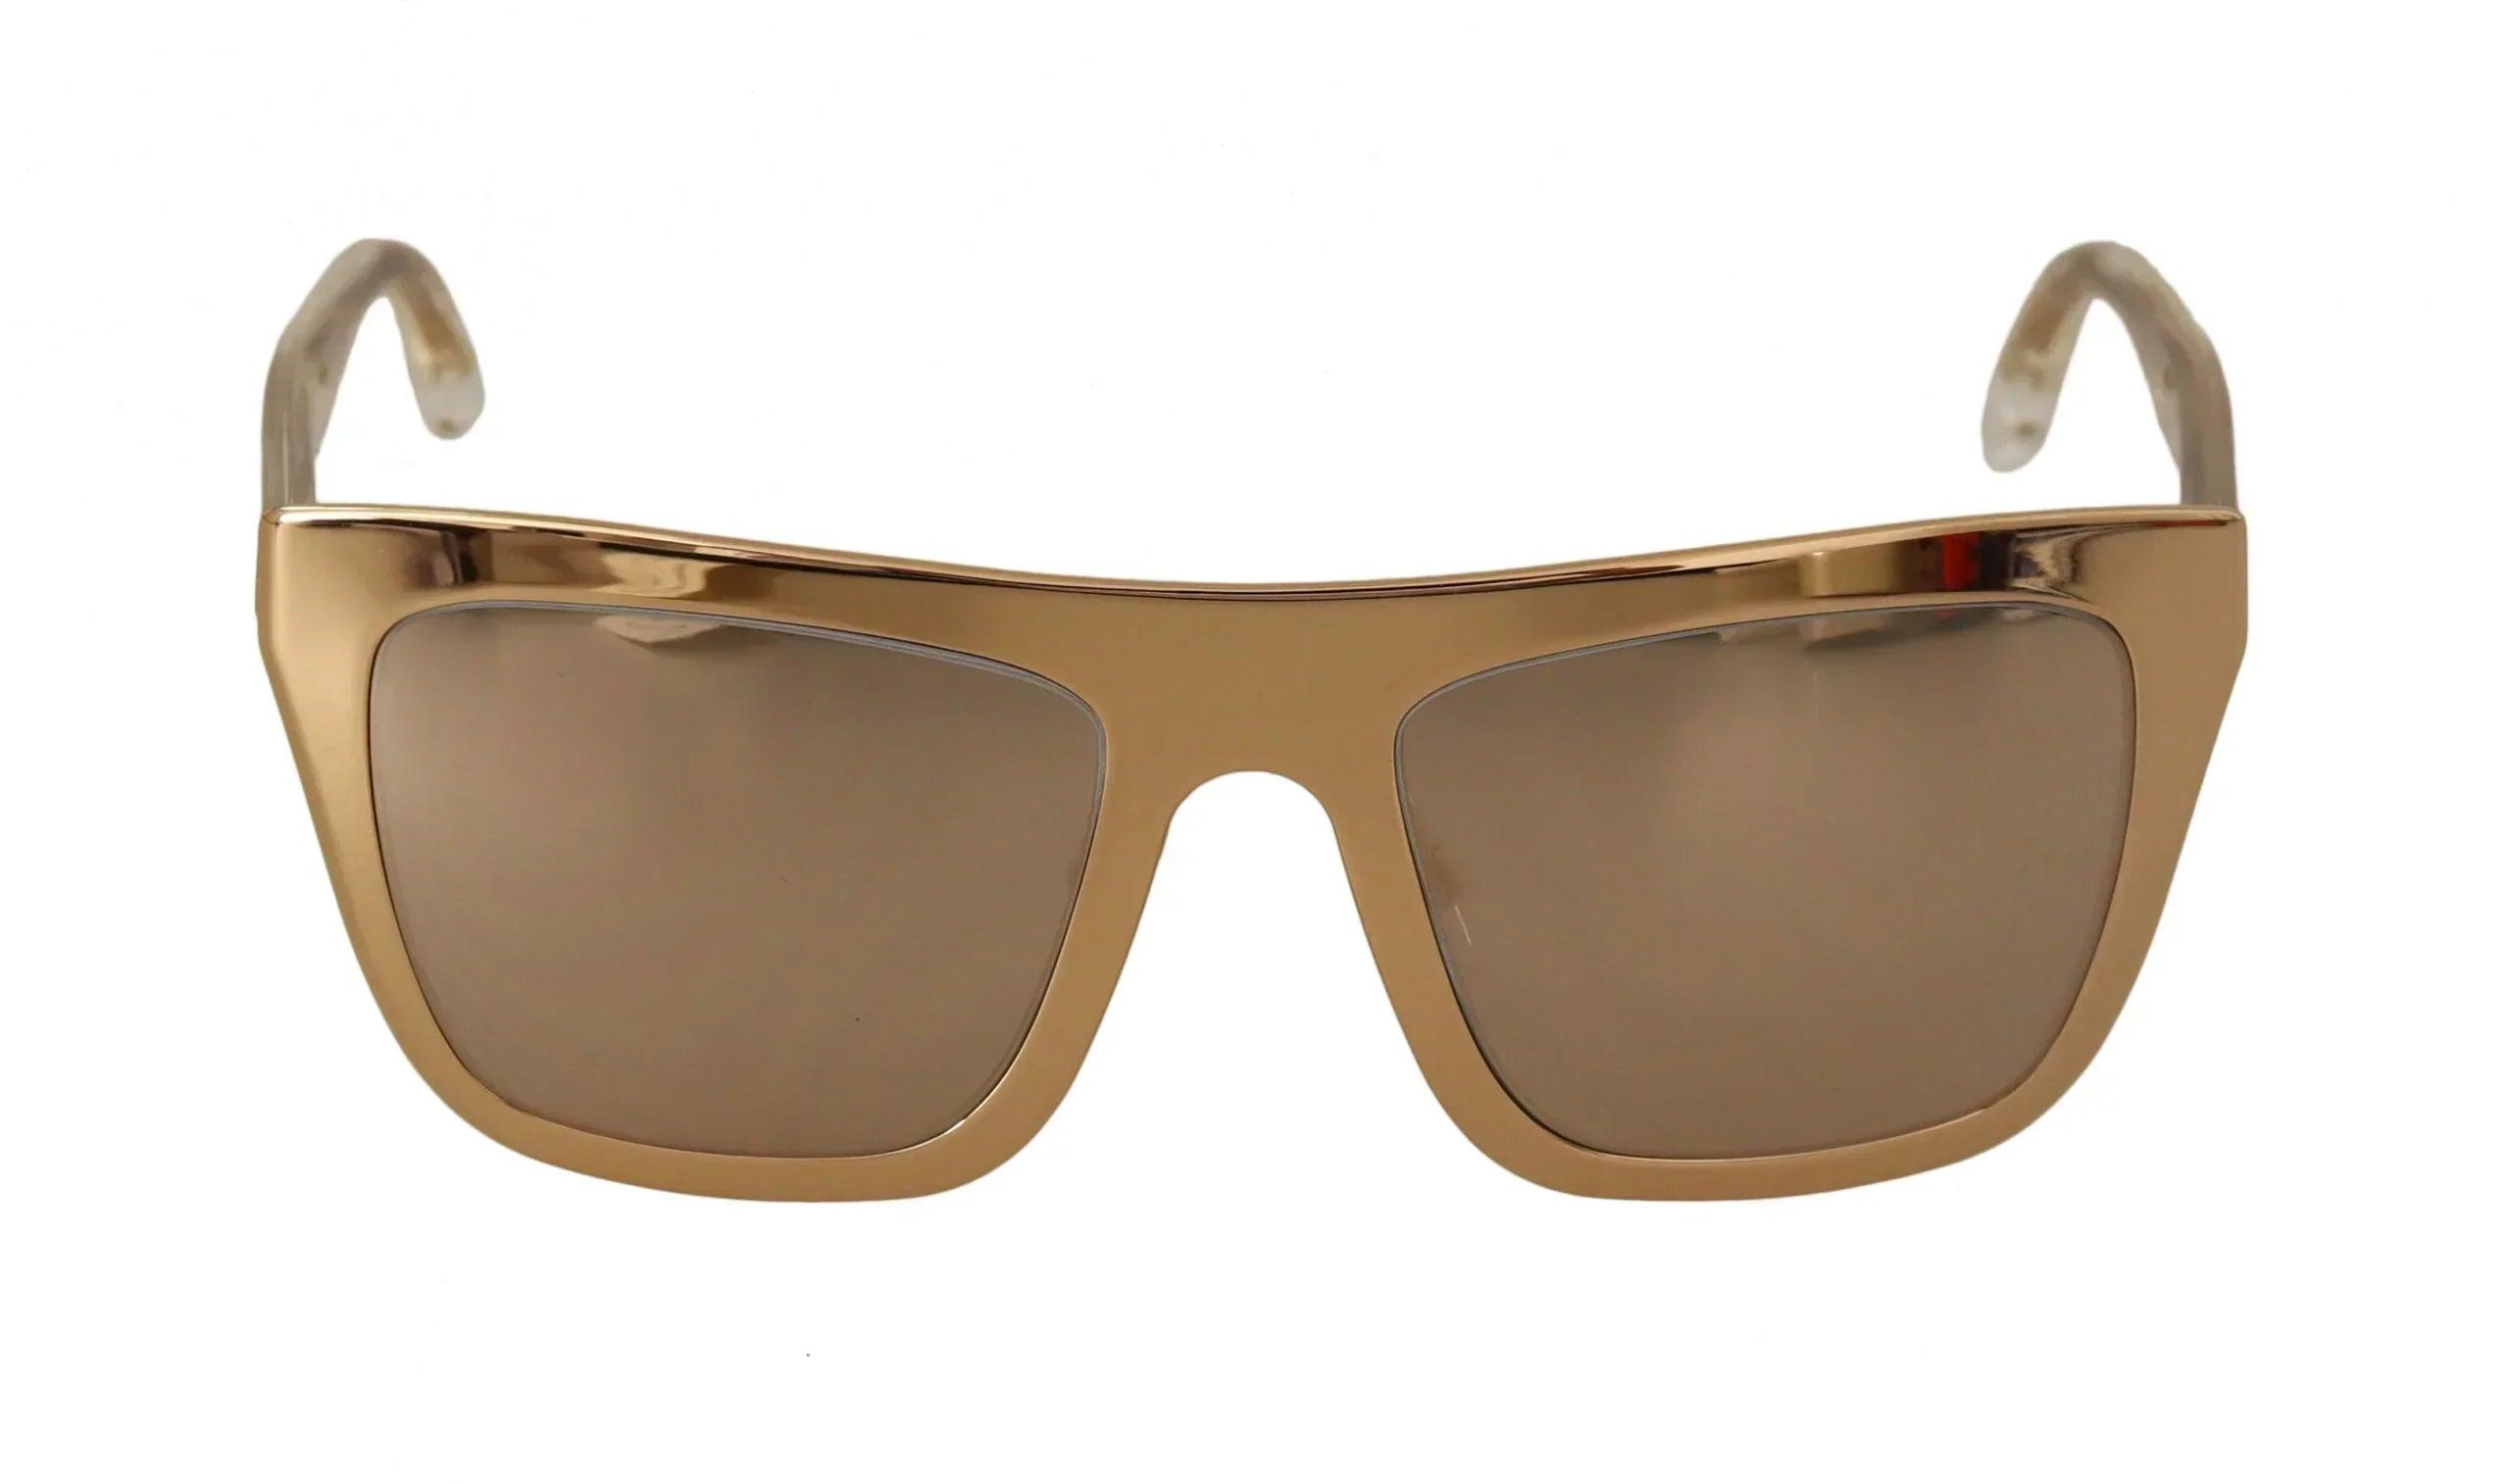 Dolce & Gabbana Gold Plated Metal Mirrored Limited Sunglasses 